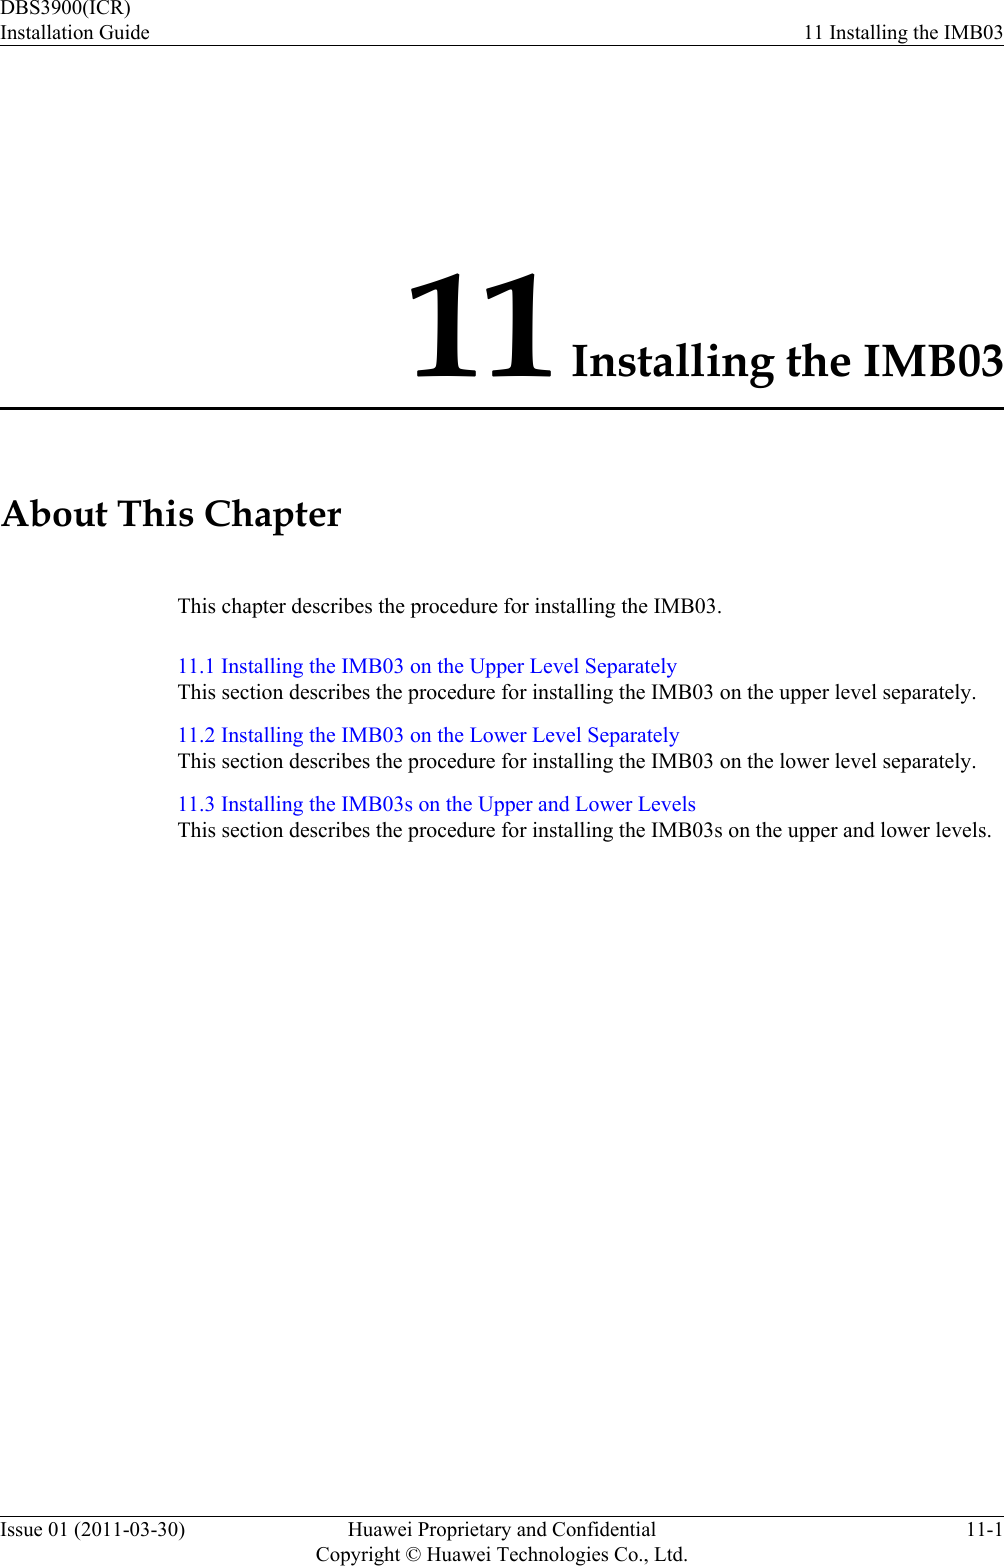 11 Installing the IMB03About This ChapterThis chapter describes the procedure for installing the IMB03.11.1 Installing the IMB03 on the Upper Level SeparatelyThis section describes the procedure for installing the IMB03 on the upper level separately.11.2 Installing the IMB03 on the Lower Level SeparatelyThis section describes the procedure for installing the IMB03 on the lower level separately.11.3 Installing the IMB03s on the Upper and Lower LevelsThis section describes the procedure for installing the IMB03s on the upper and lower levels.DBS3900(ICR)Installation Guide 11 Installing the IMB03Issue 01 (2011-03-30) Huawei Proprietary and ConfidentialCopyright © Huawei Technologies Co., Ltd.11-1